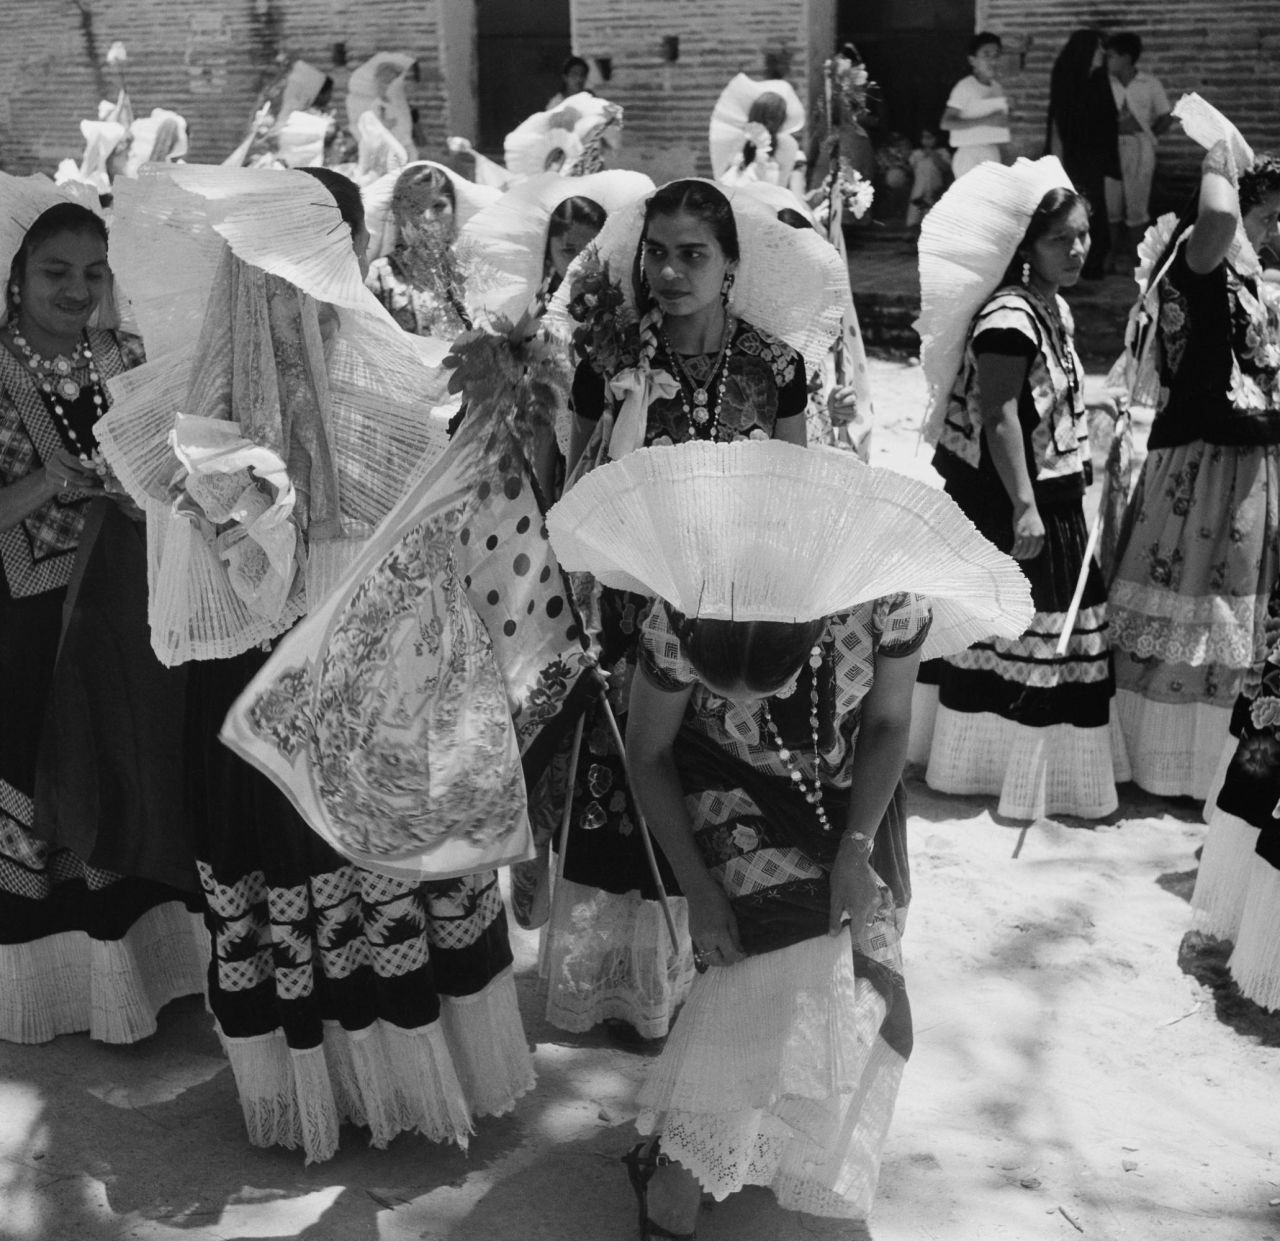 Women wearing native dresses in Tehuantepec, Mexico in 1952.